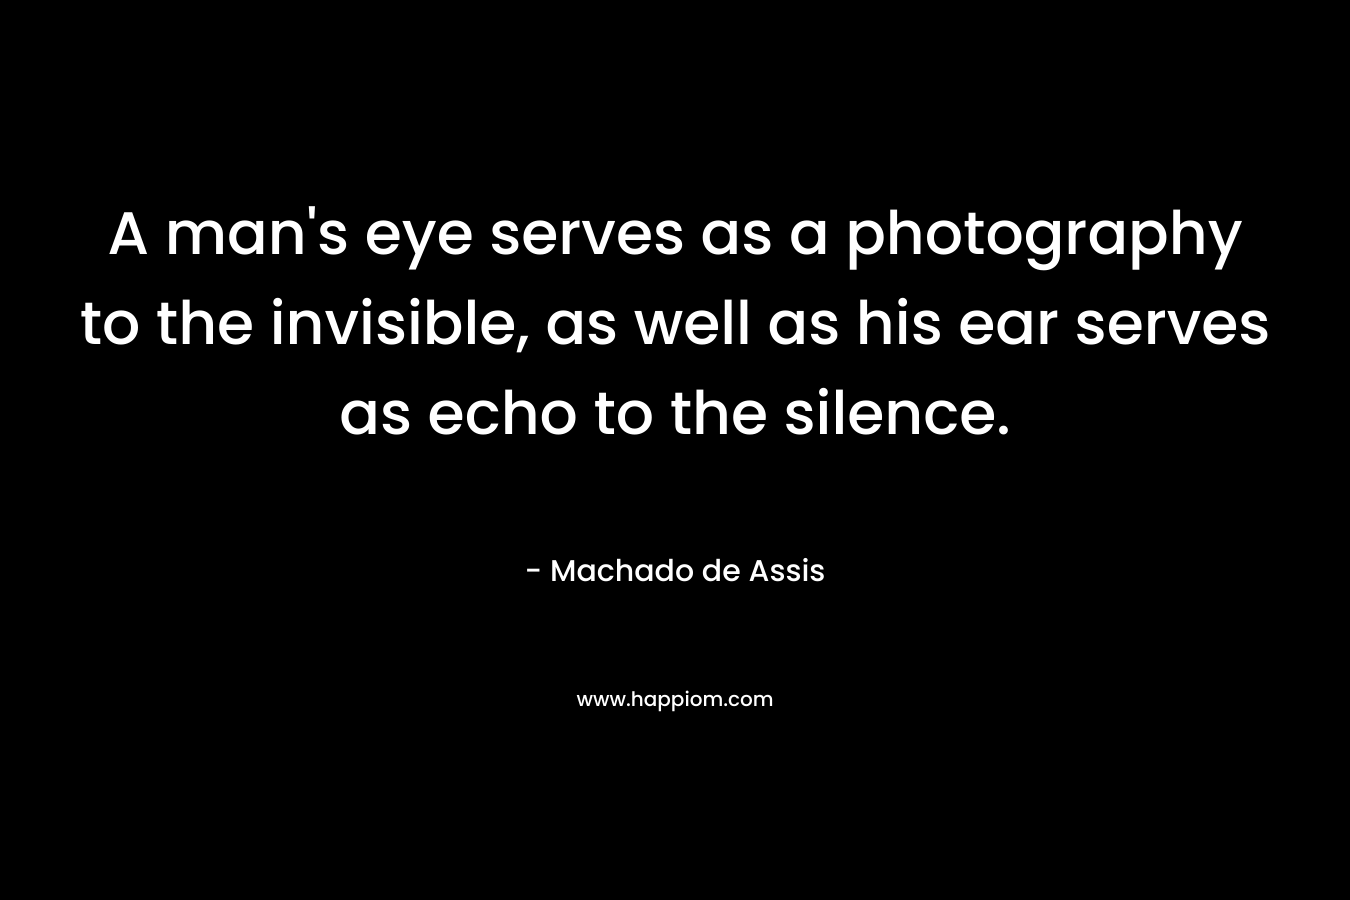 A man's eye serves as a photography to the invisible, as well as his ear serves as echo to the silence.